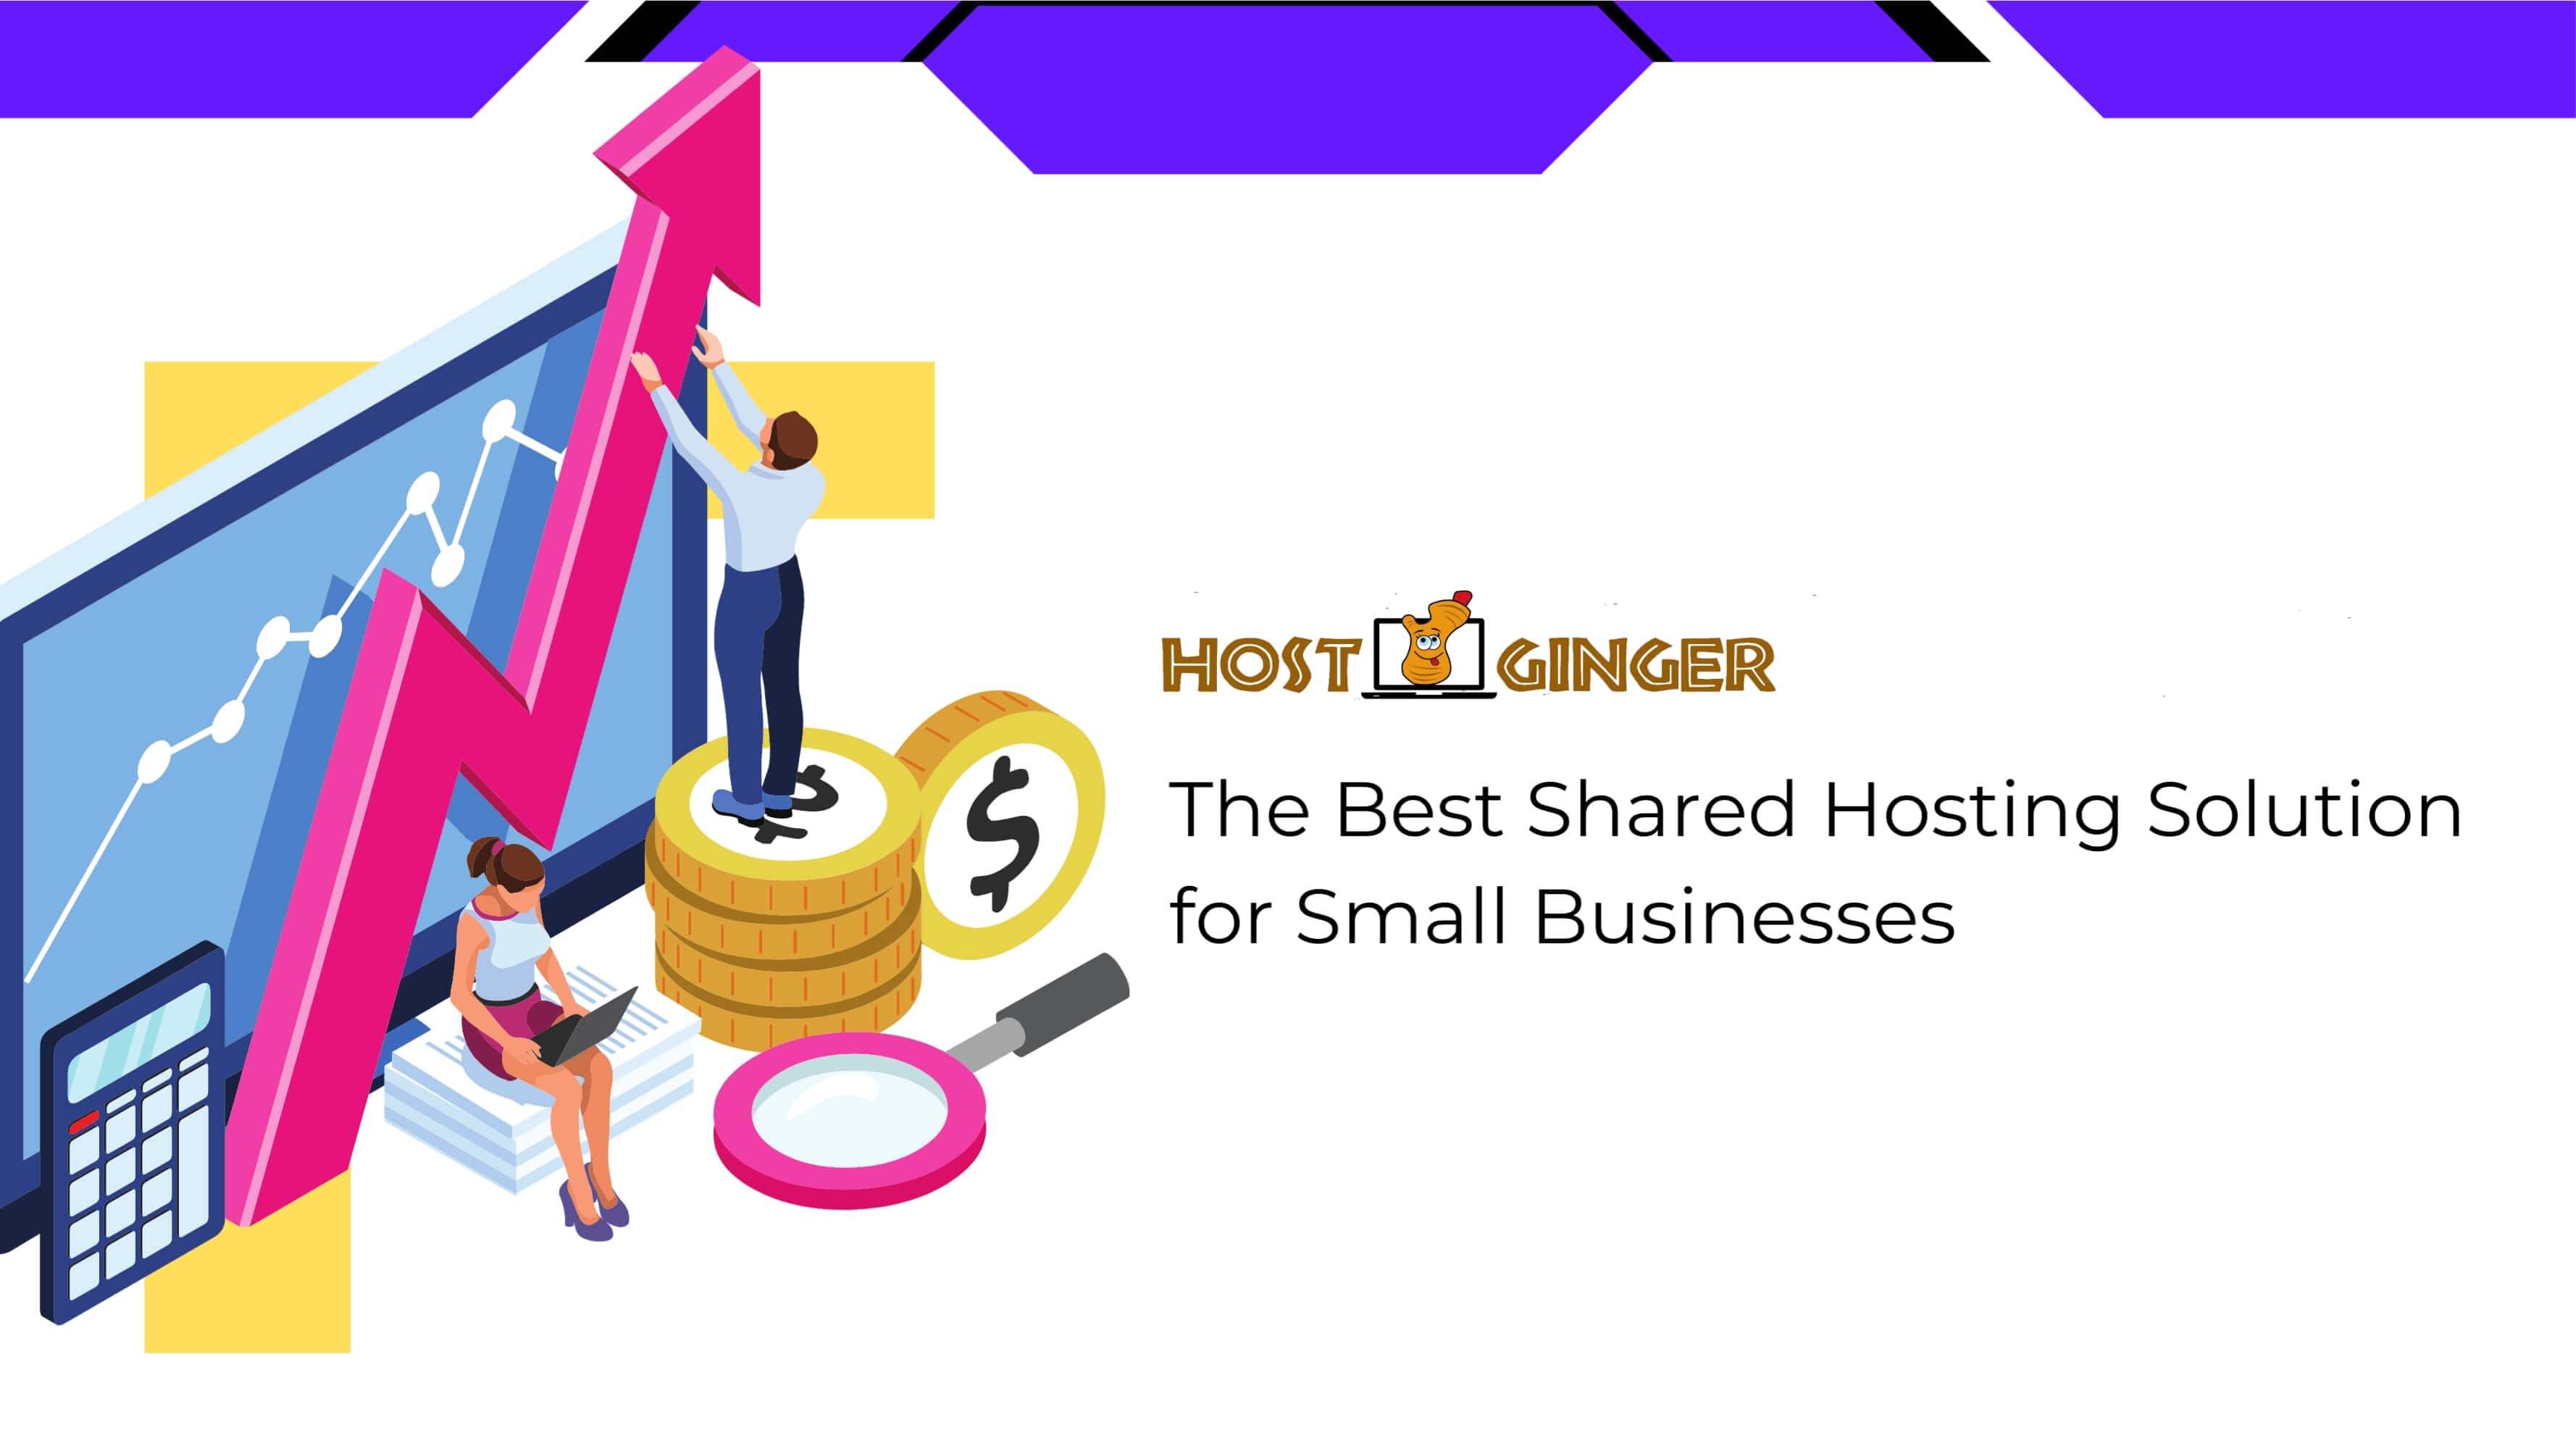 The Best Shared Hosting Solution for Small Businesses